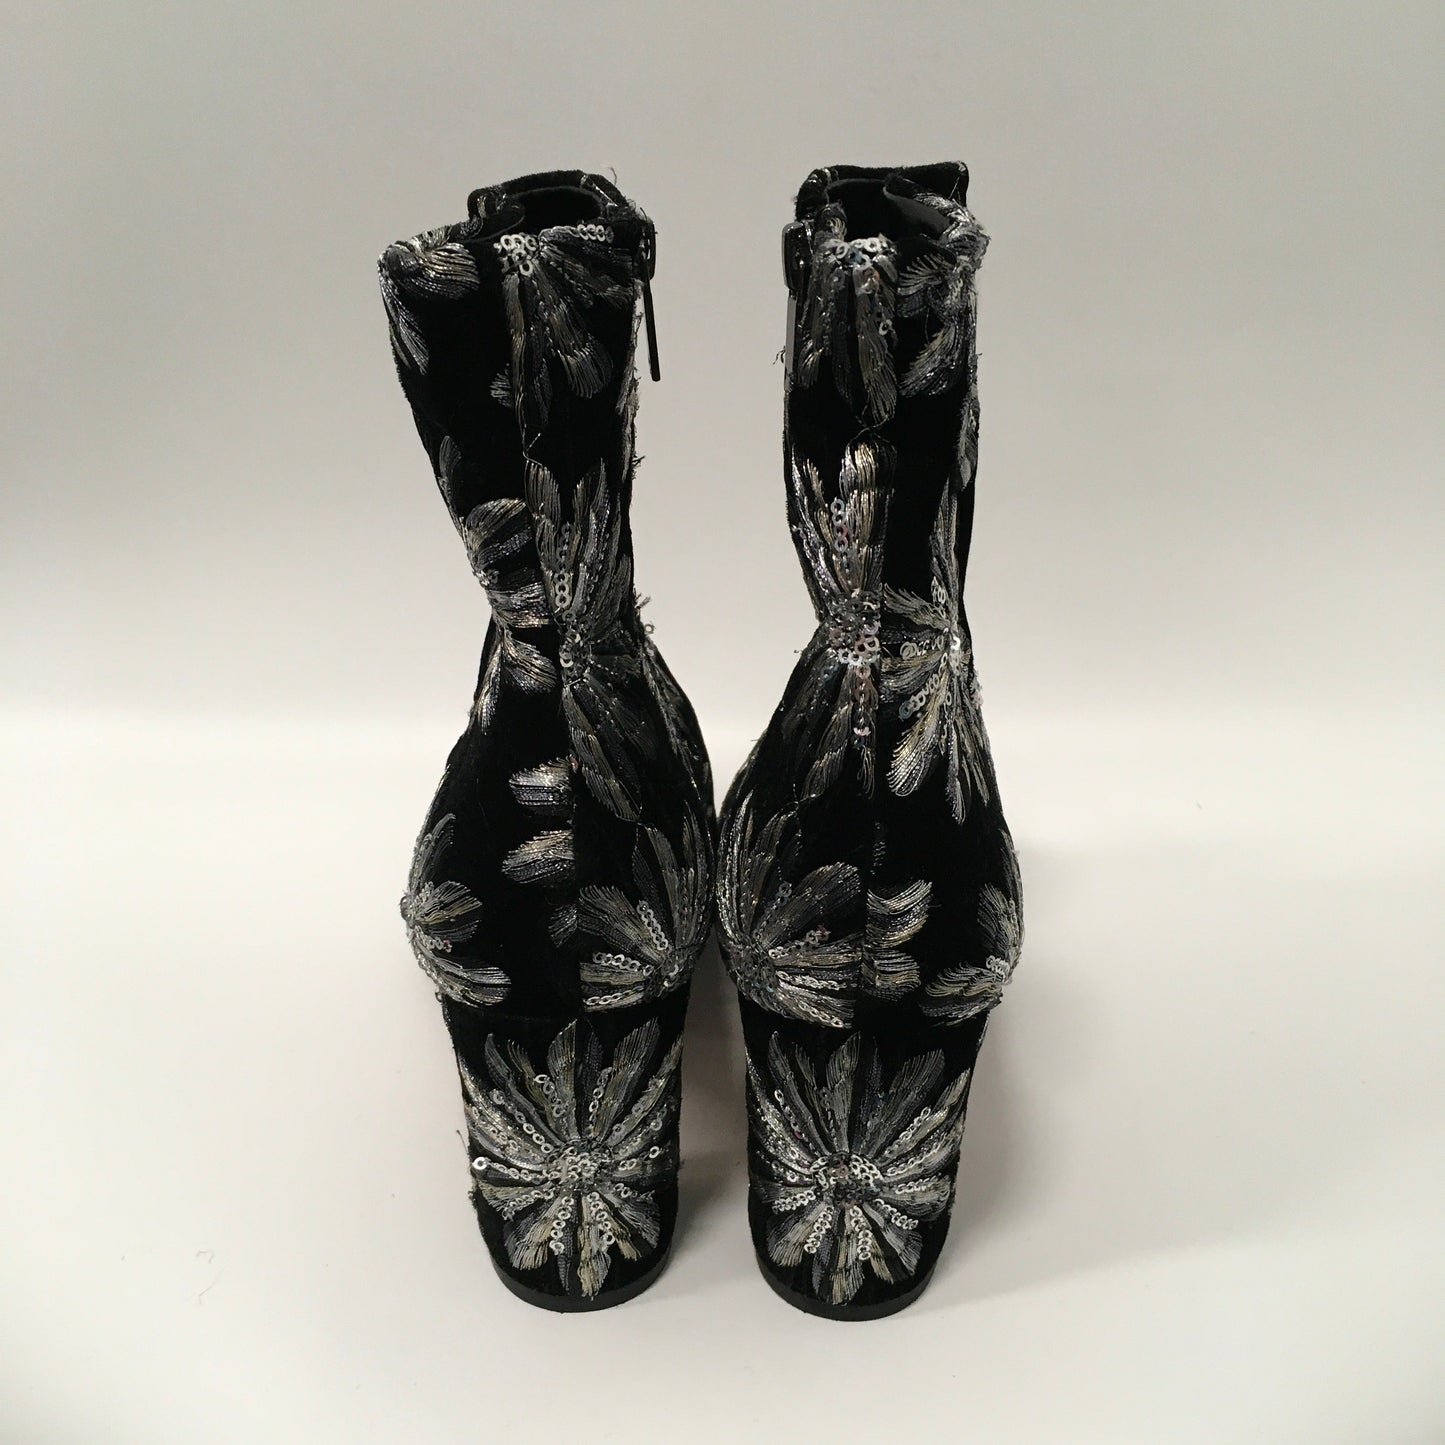 Boots Ankle Heels By Marc Fisher  Size: 8.5